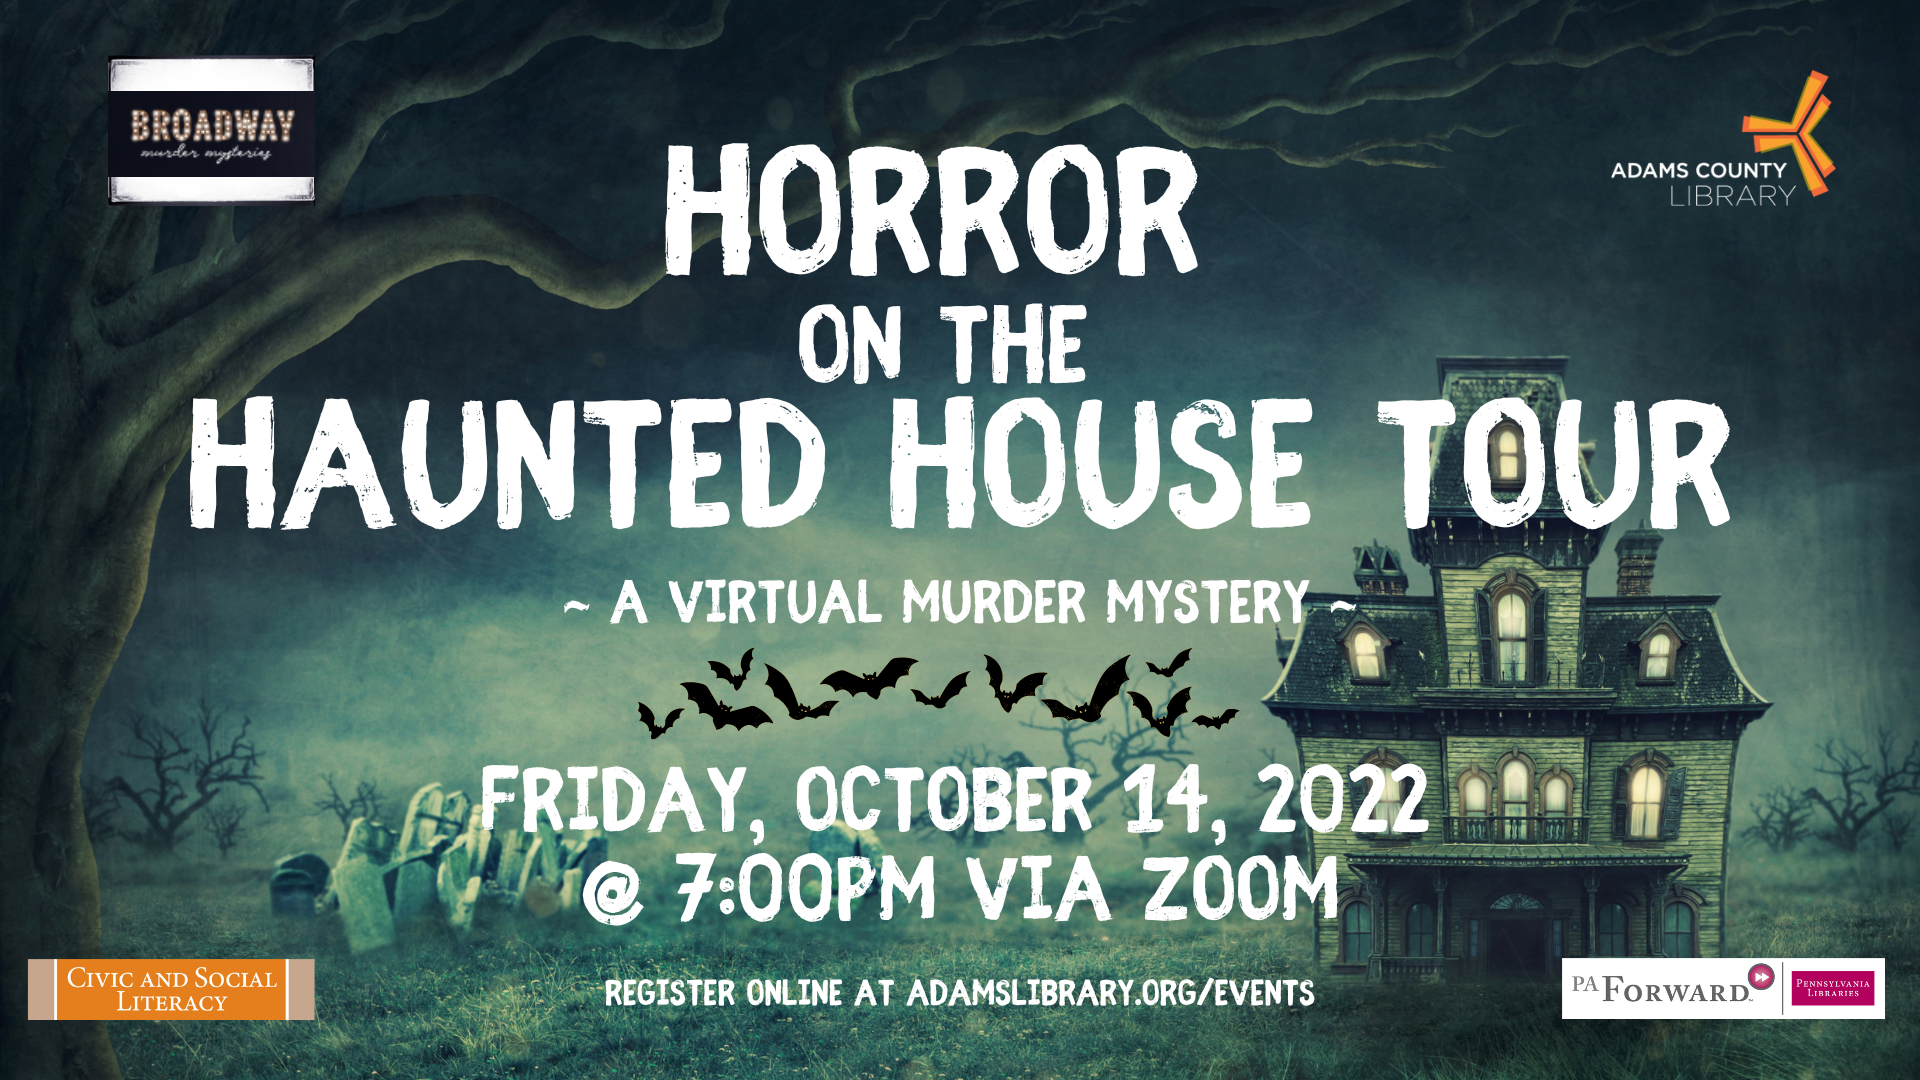 Horror on the Haunted House Tour - A Virtual Murder Mystery